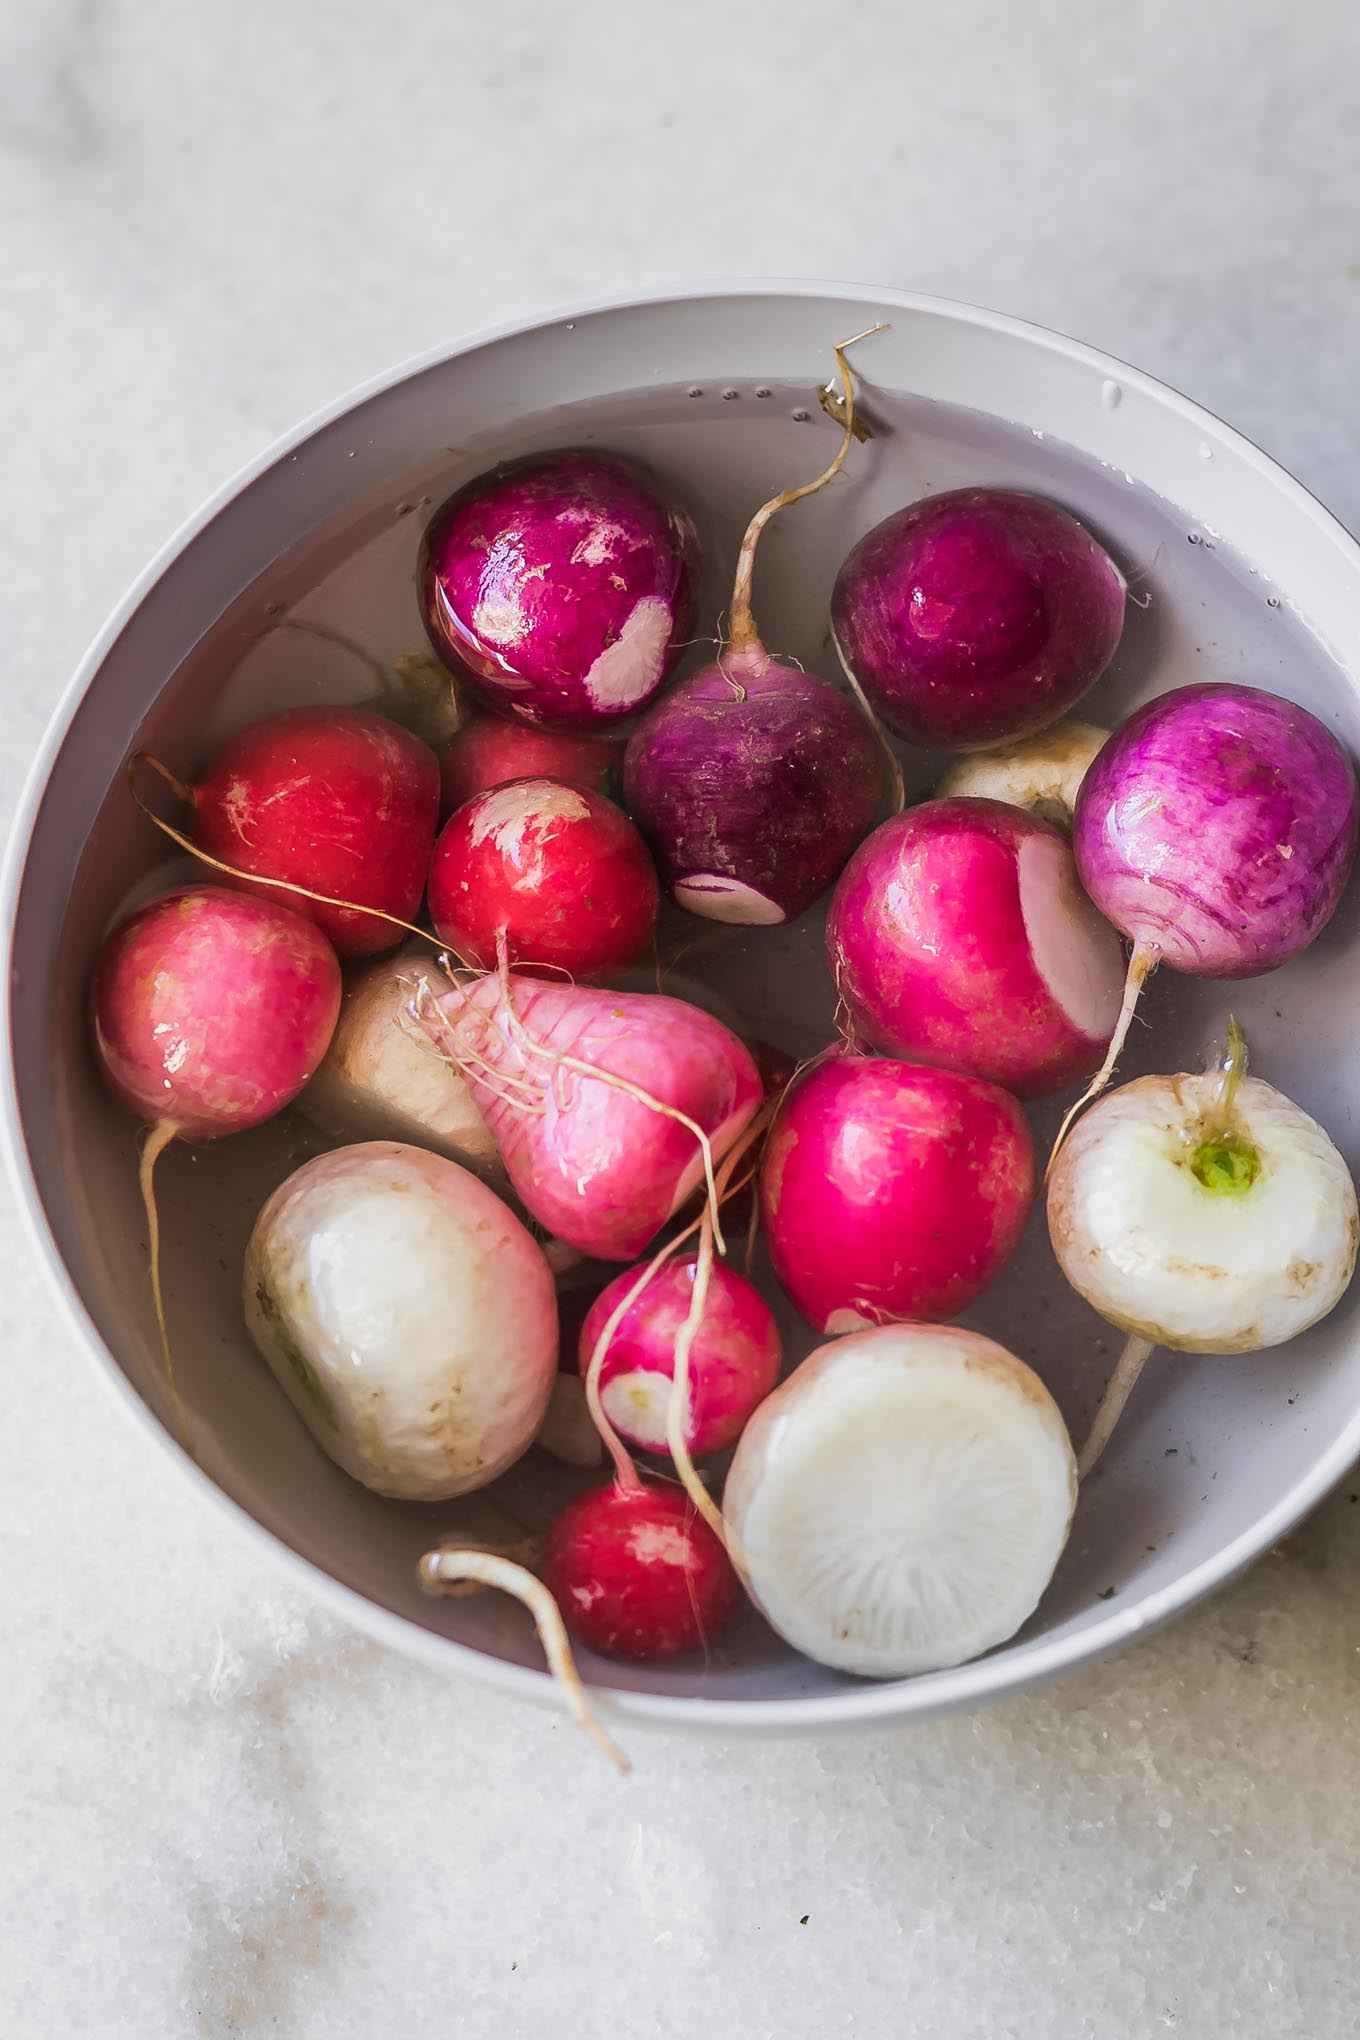 How to Store Radishes to Keep Them Fresh